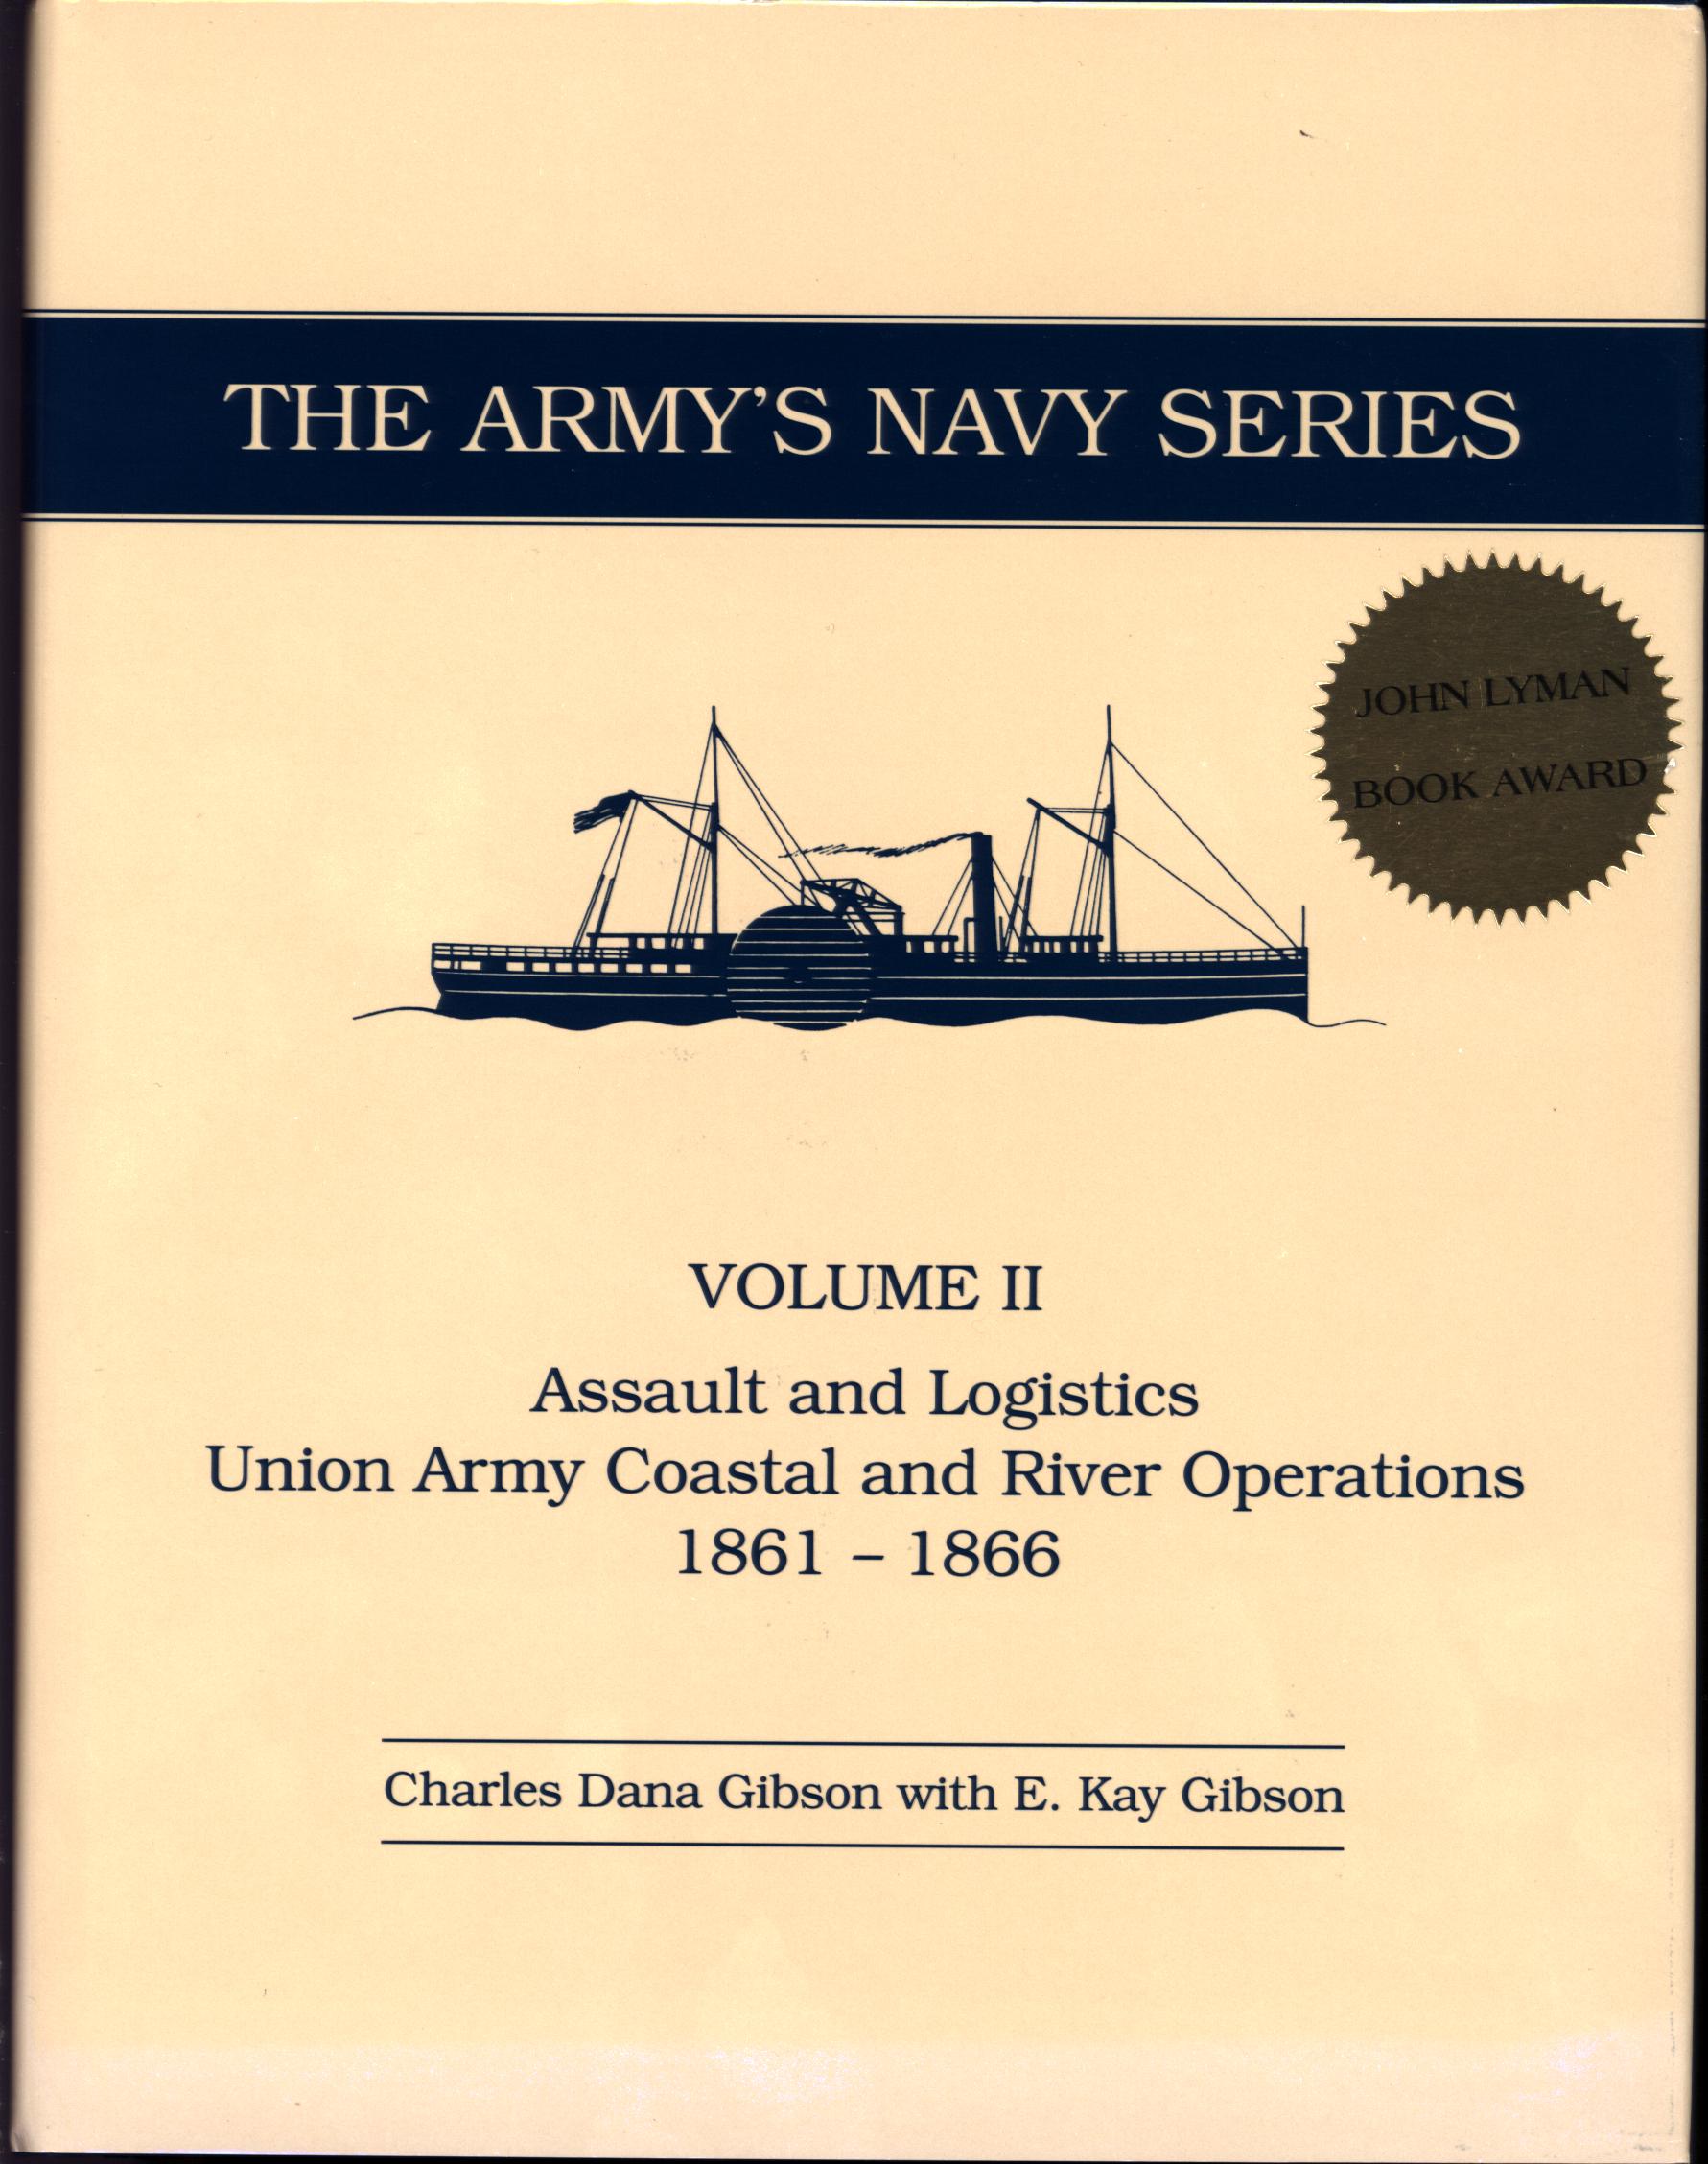 ASSAULT AND LOGISTICS: Union Army coastal and river operations, 1861-1866. misc6603adustjacketcover